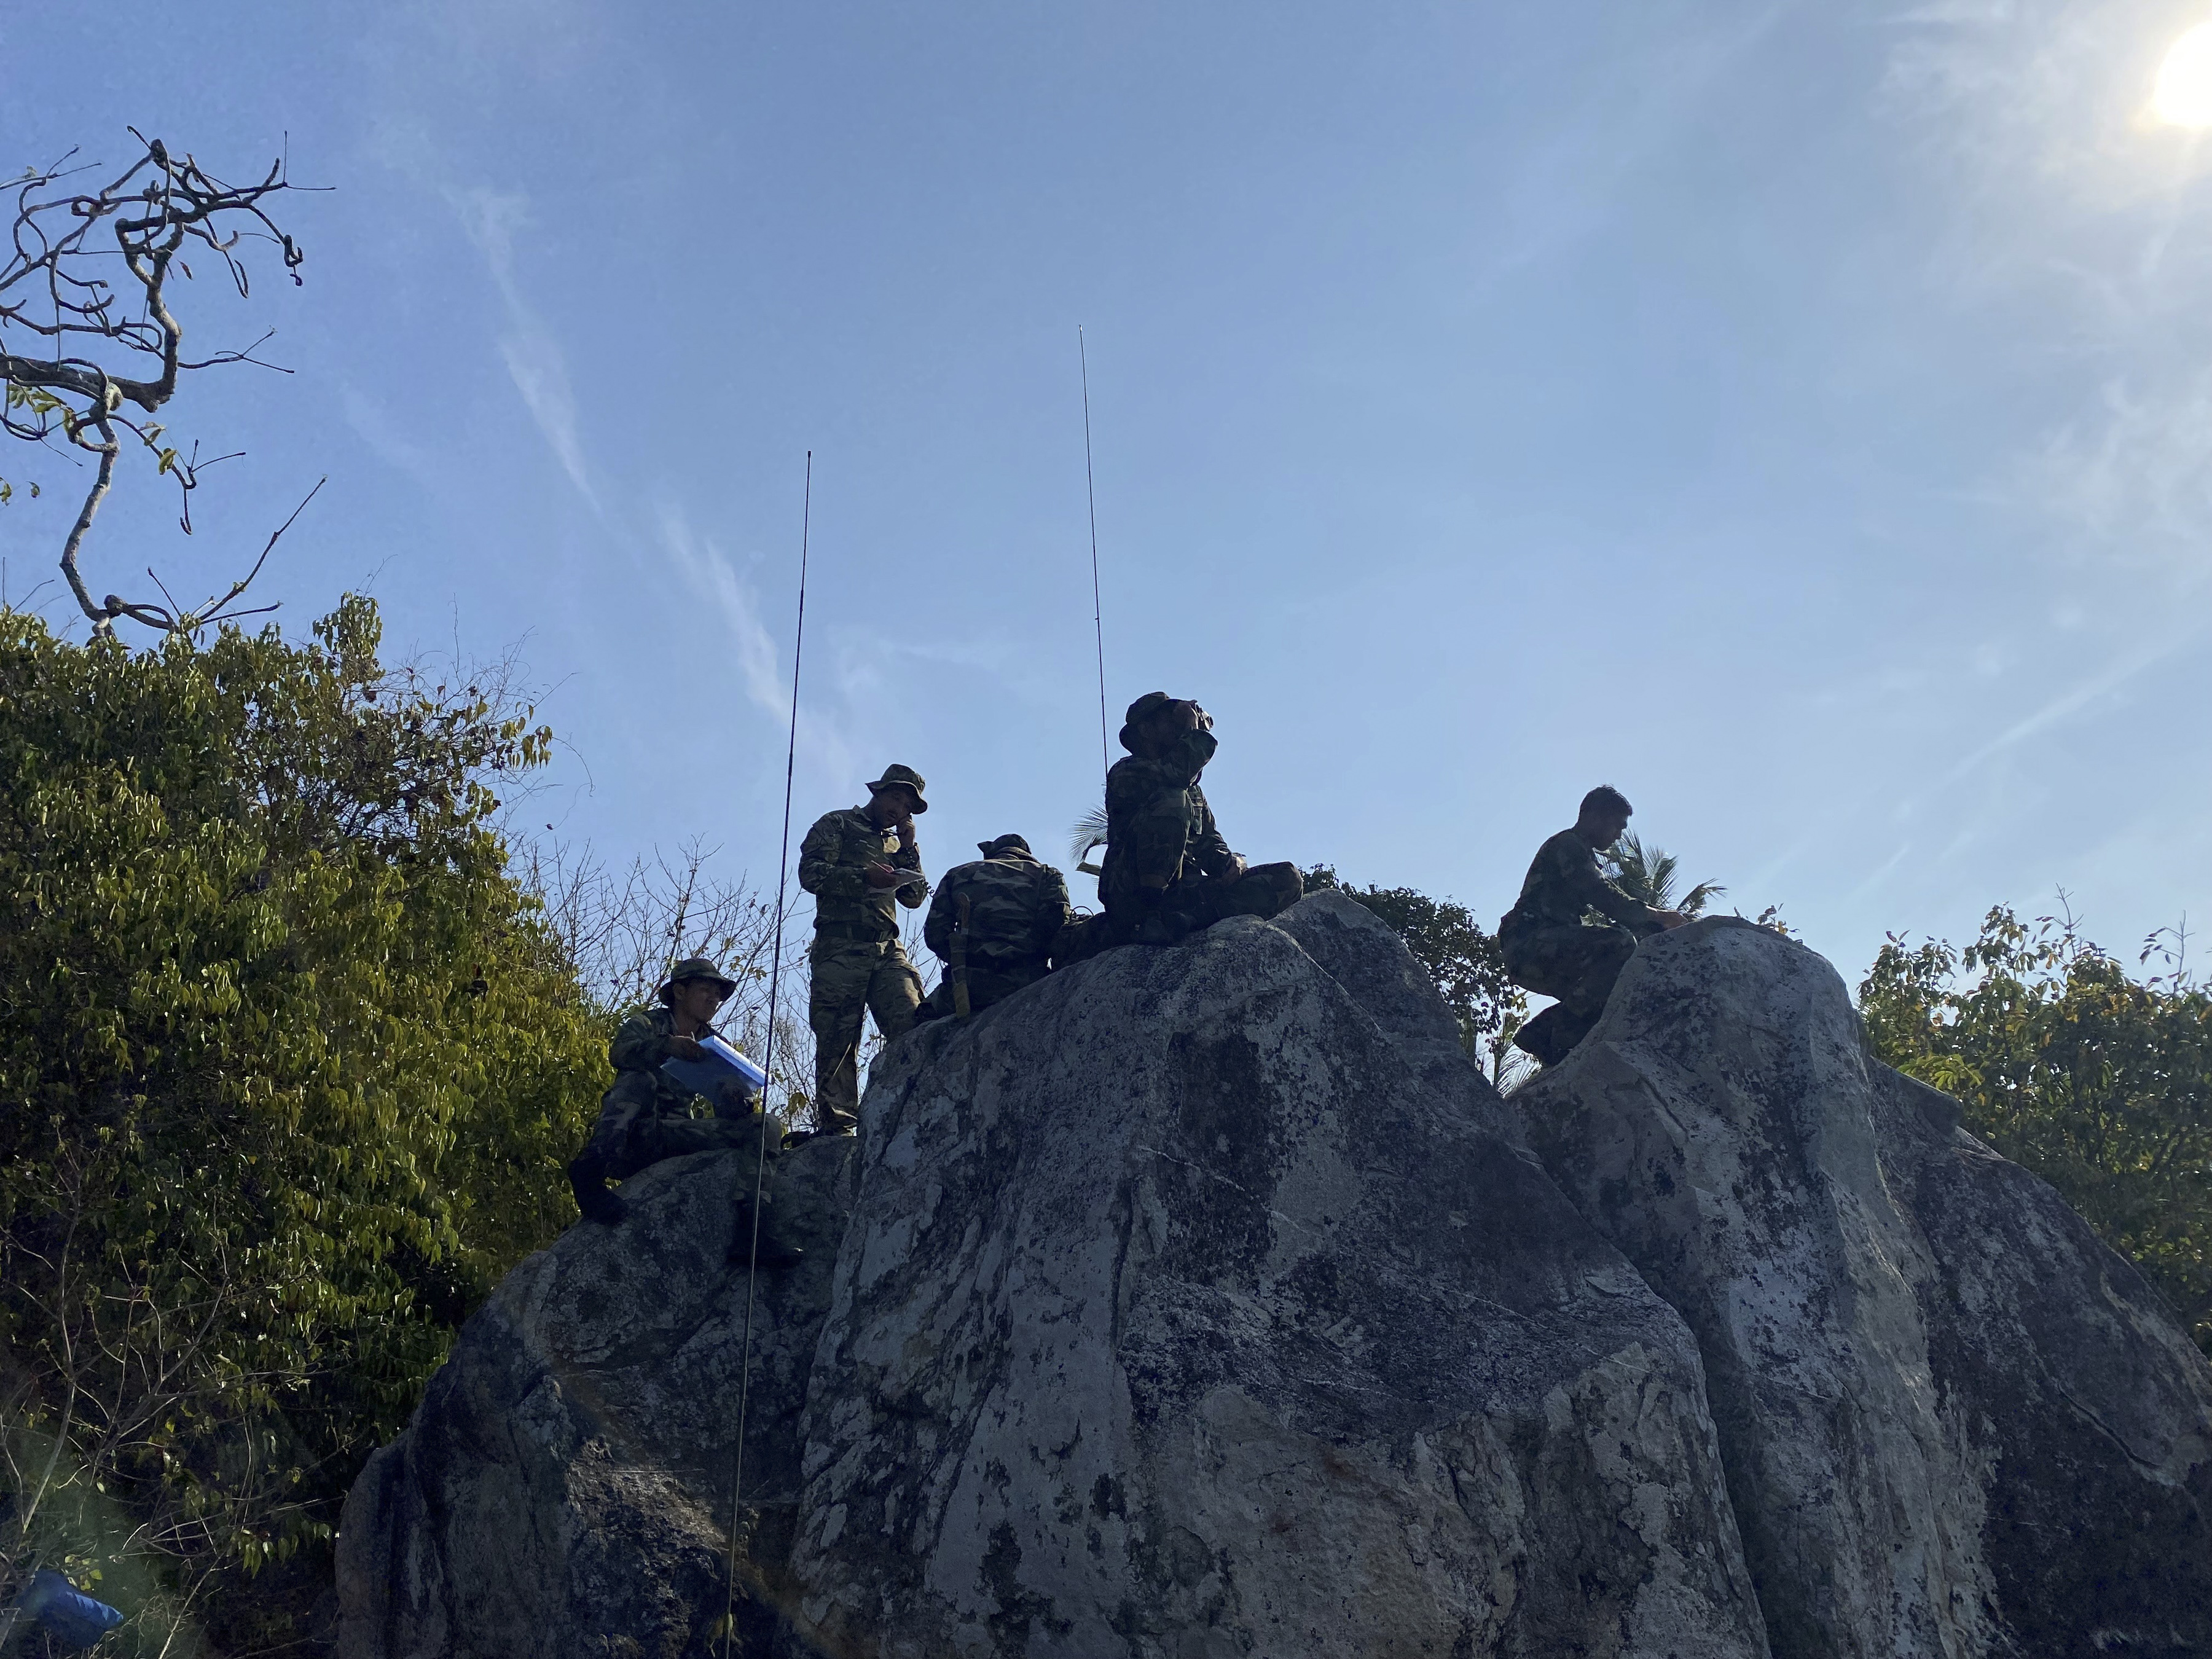 military personnel atop a rocky outcrop as an observation post